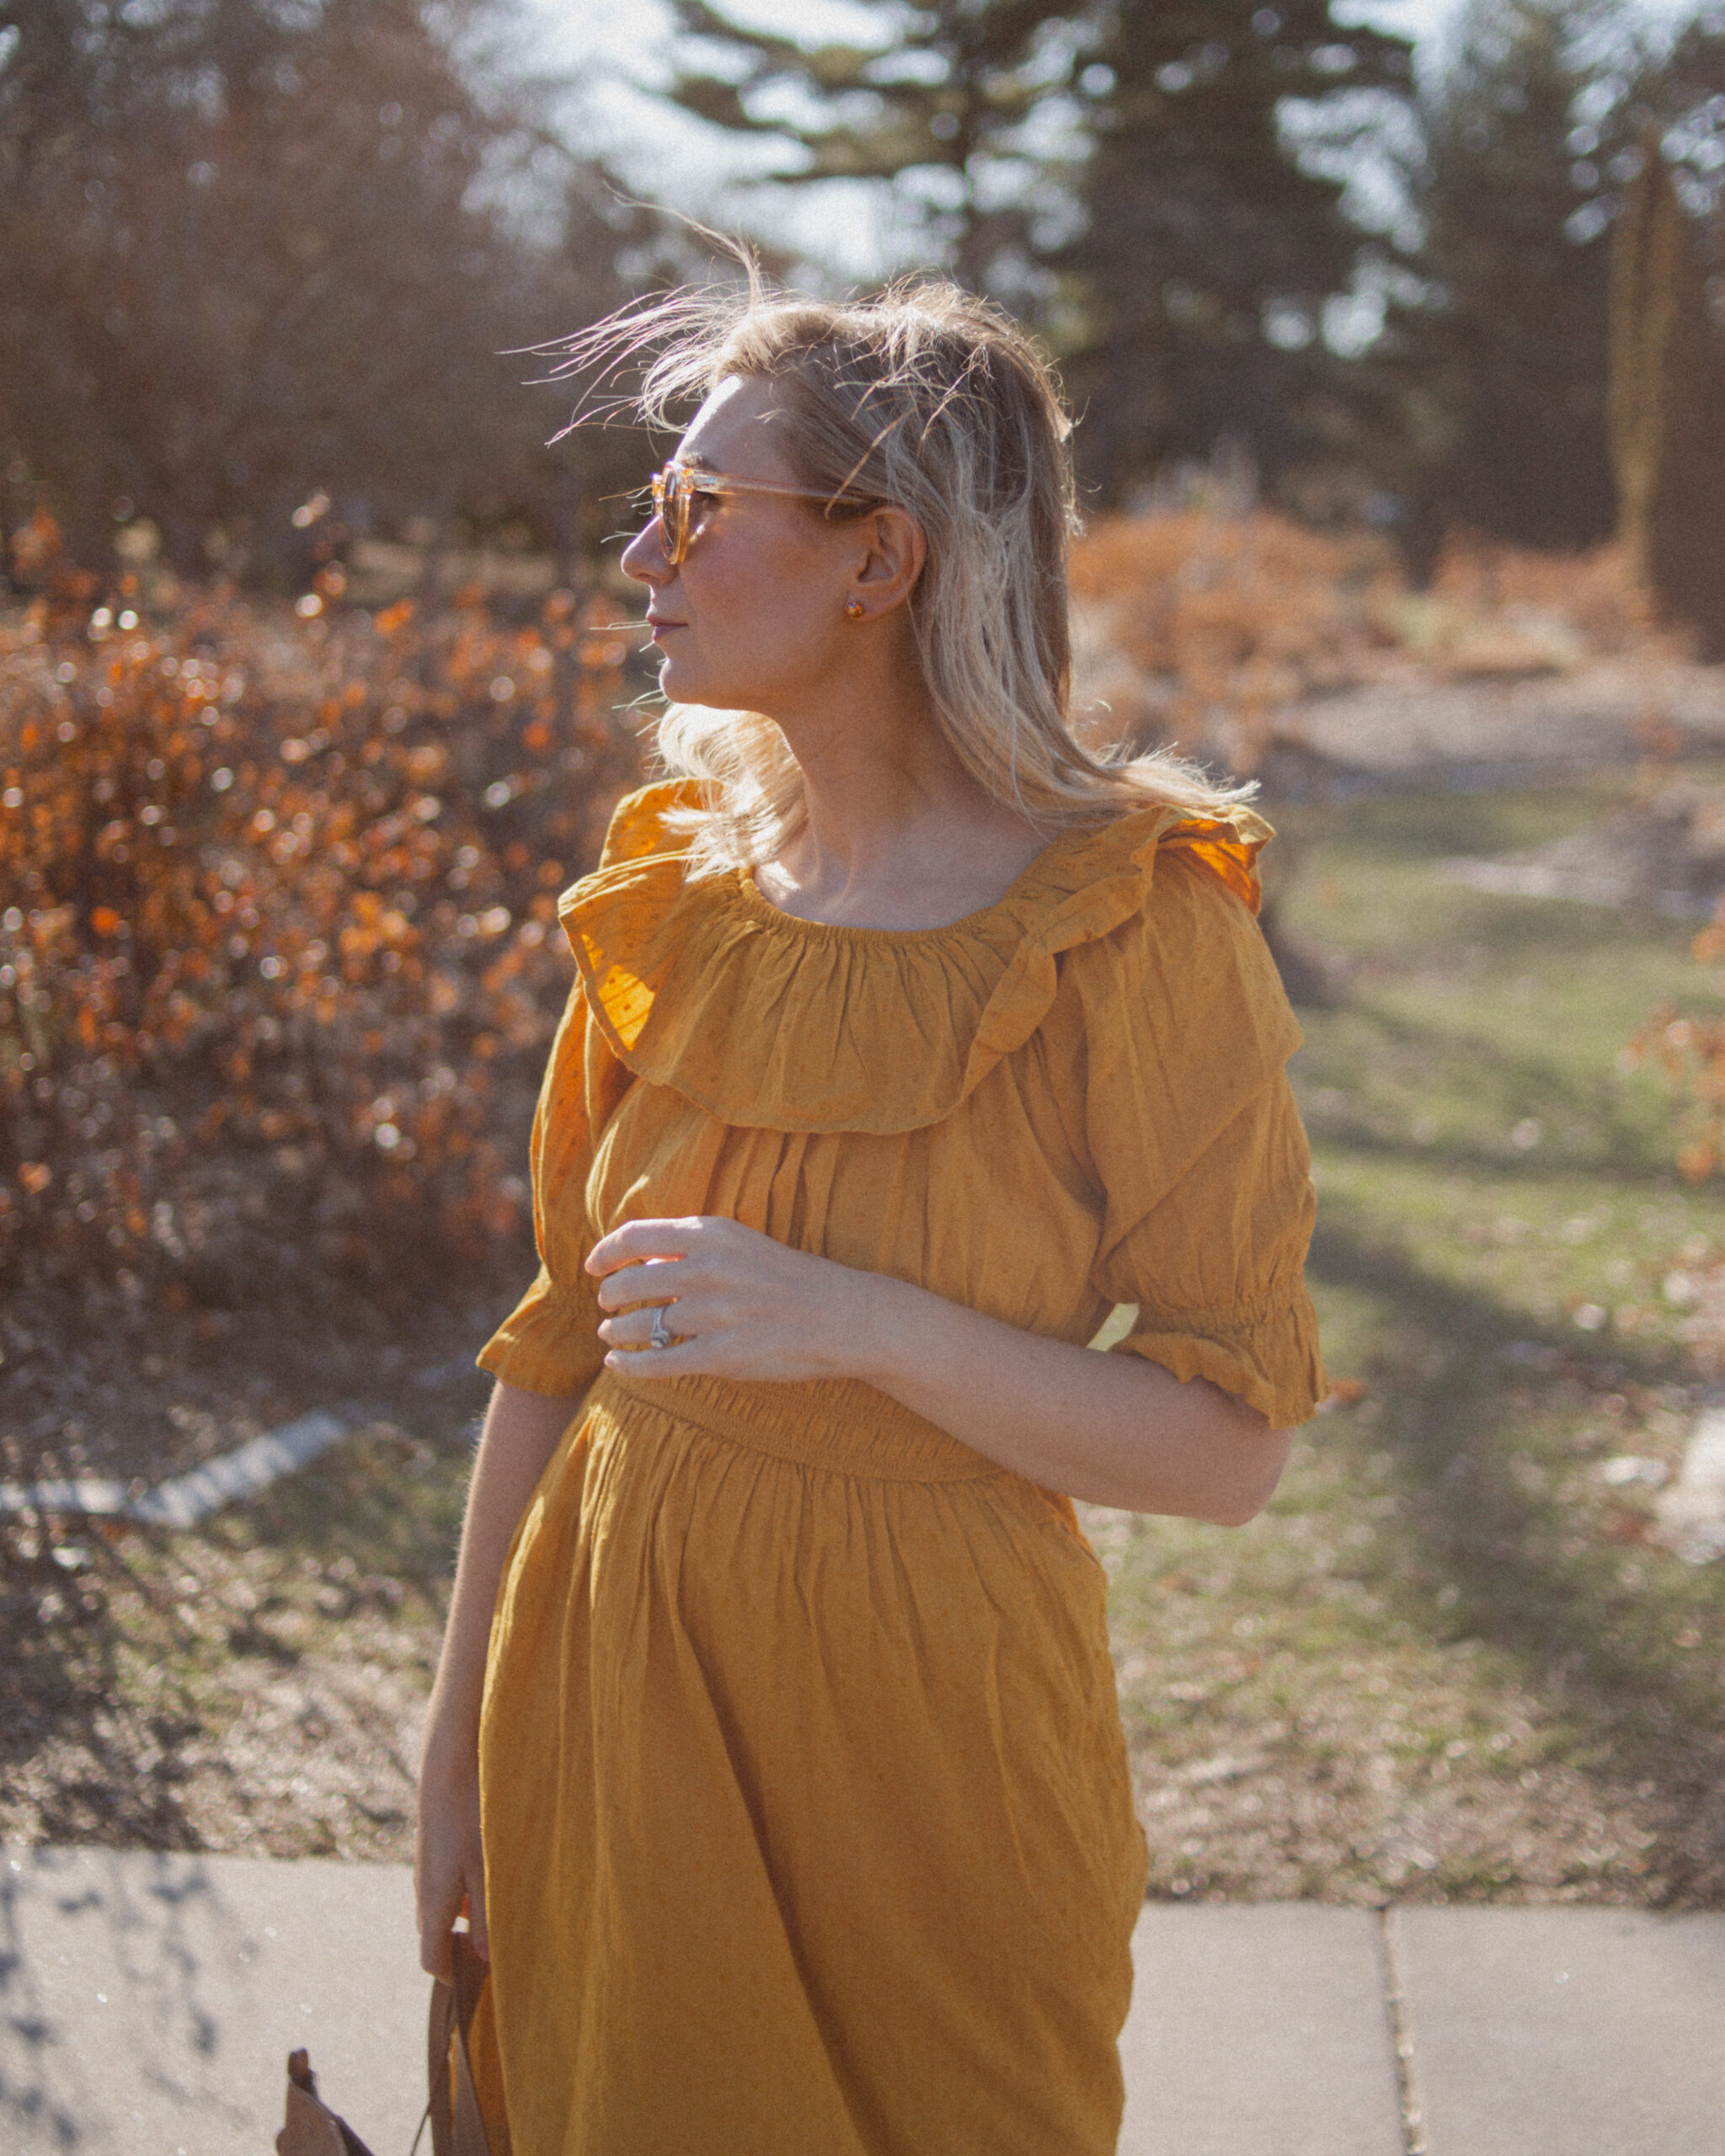 Karin Emily shares her favorites shoes for spring and wears a goldenrod yellow dress